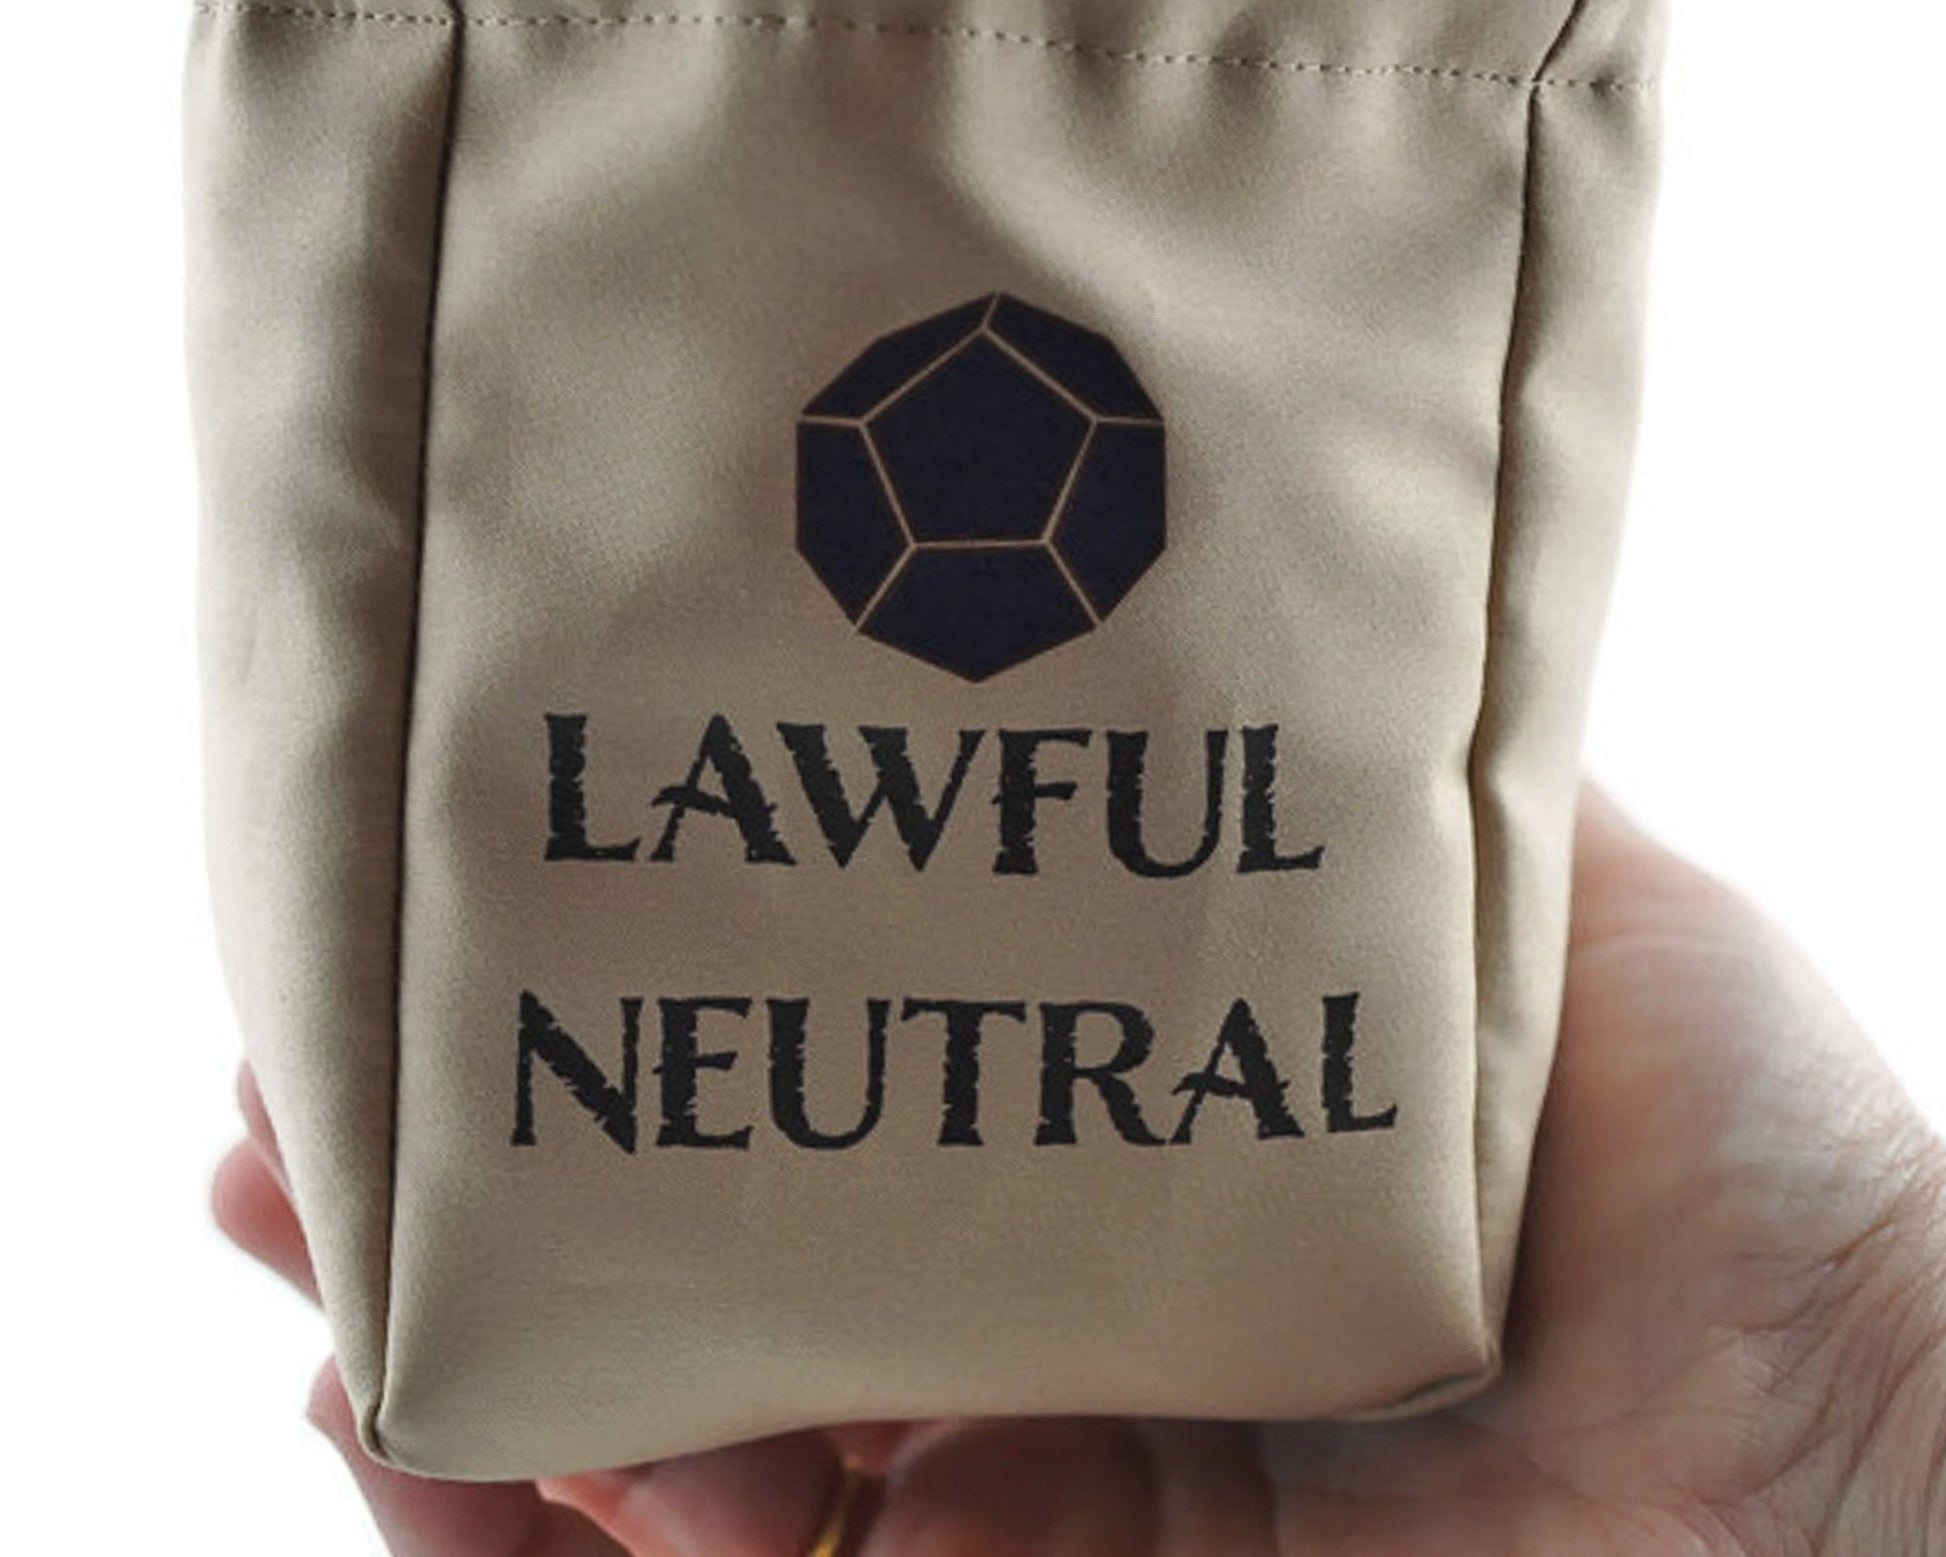 D20 dice bag,&quot;Lawful Neutral, Dungeons and Dragons dice pouch